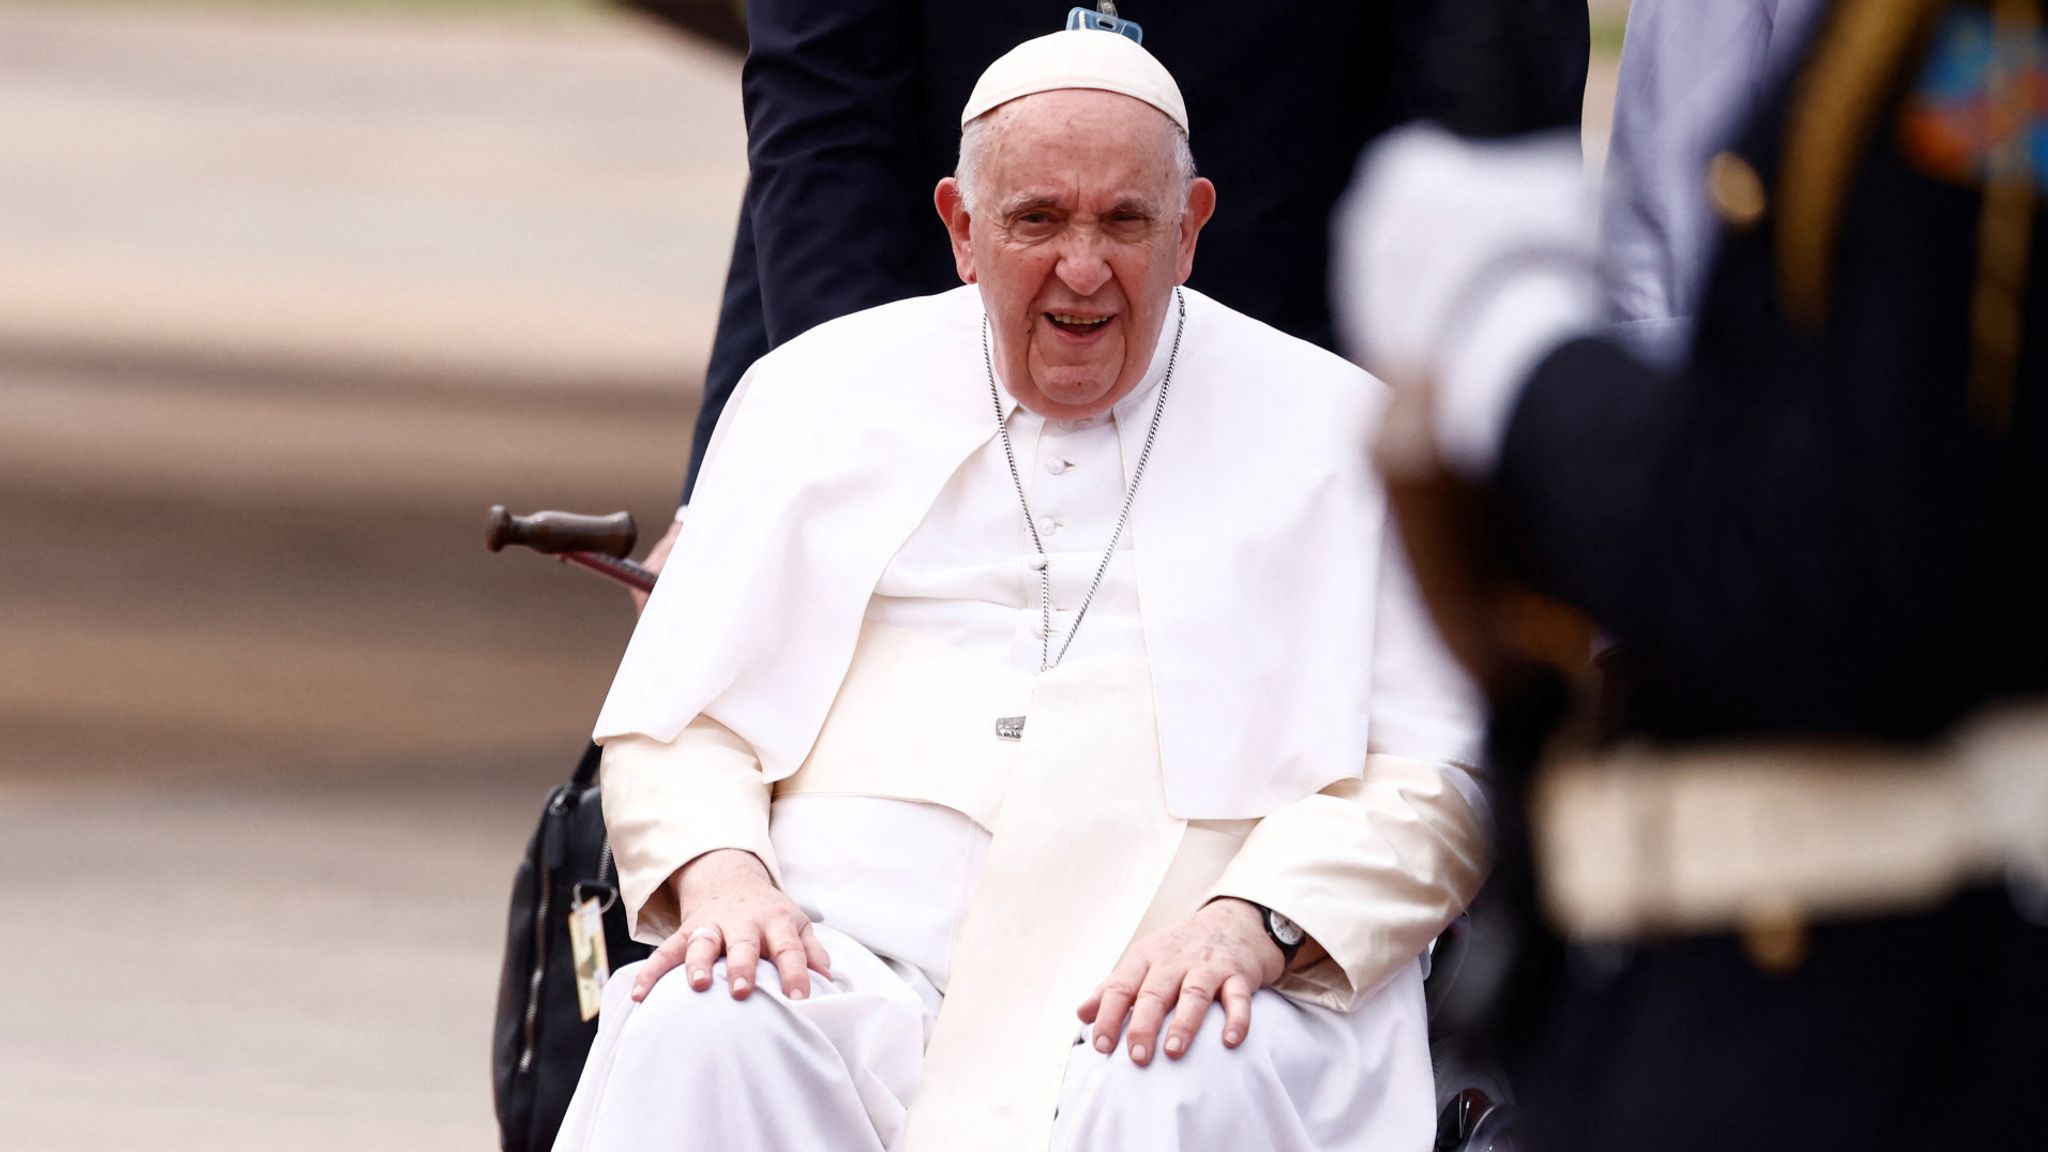 høste svinge strømper Pope Francis updates Catholic Church rules on dealing with sexual abuse to  include lay leaders | UK News | Sky News